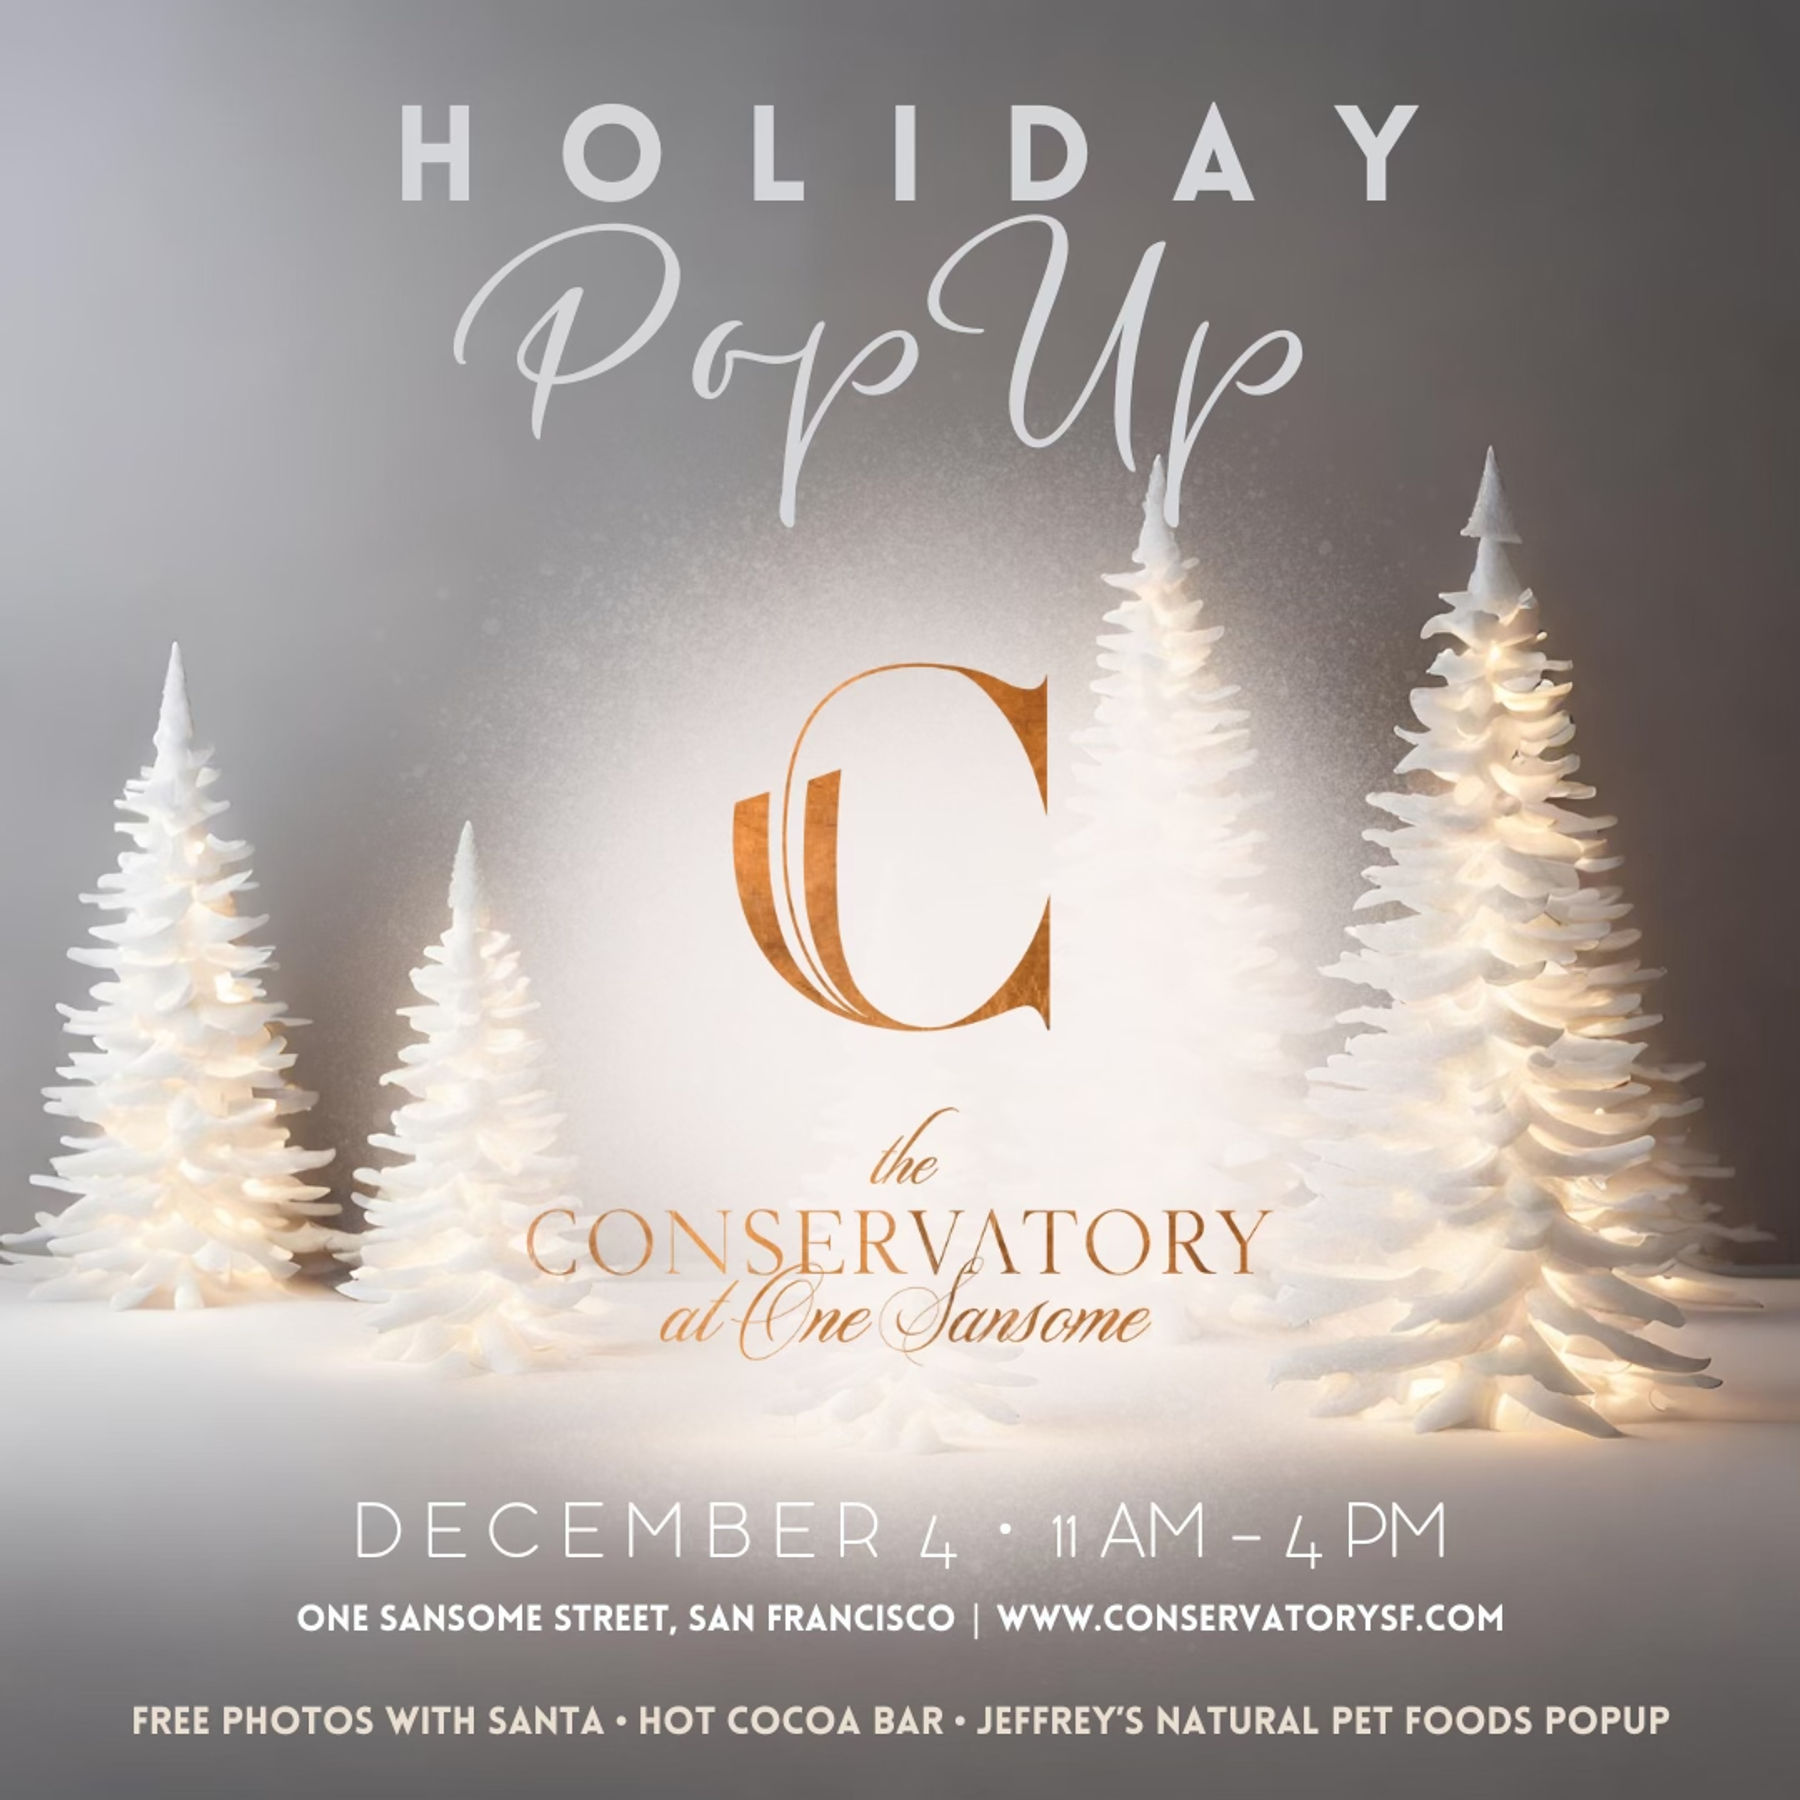 Holiday Pop Up at The Conservatory at One Sansome | Downtown San Francisco